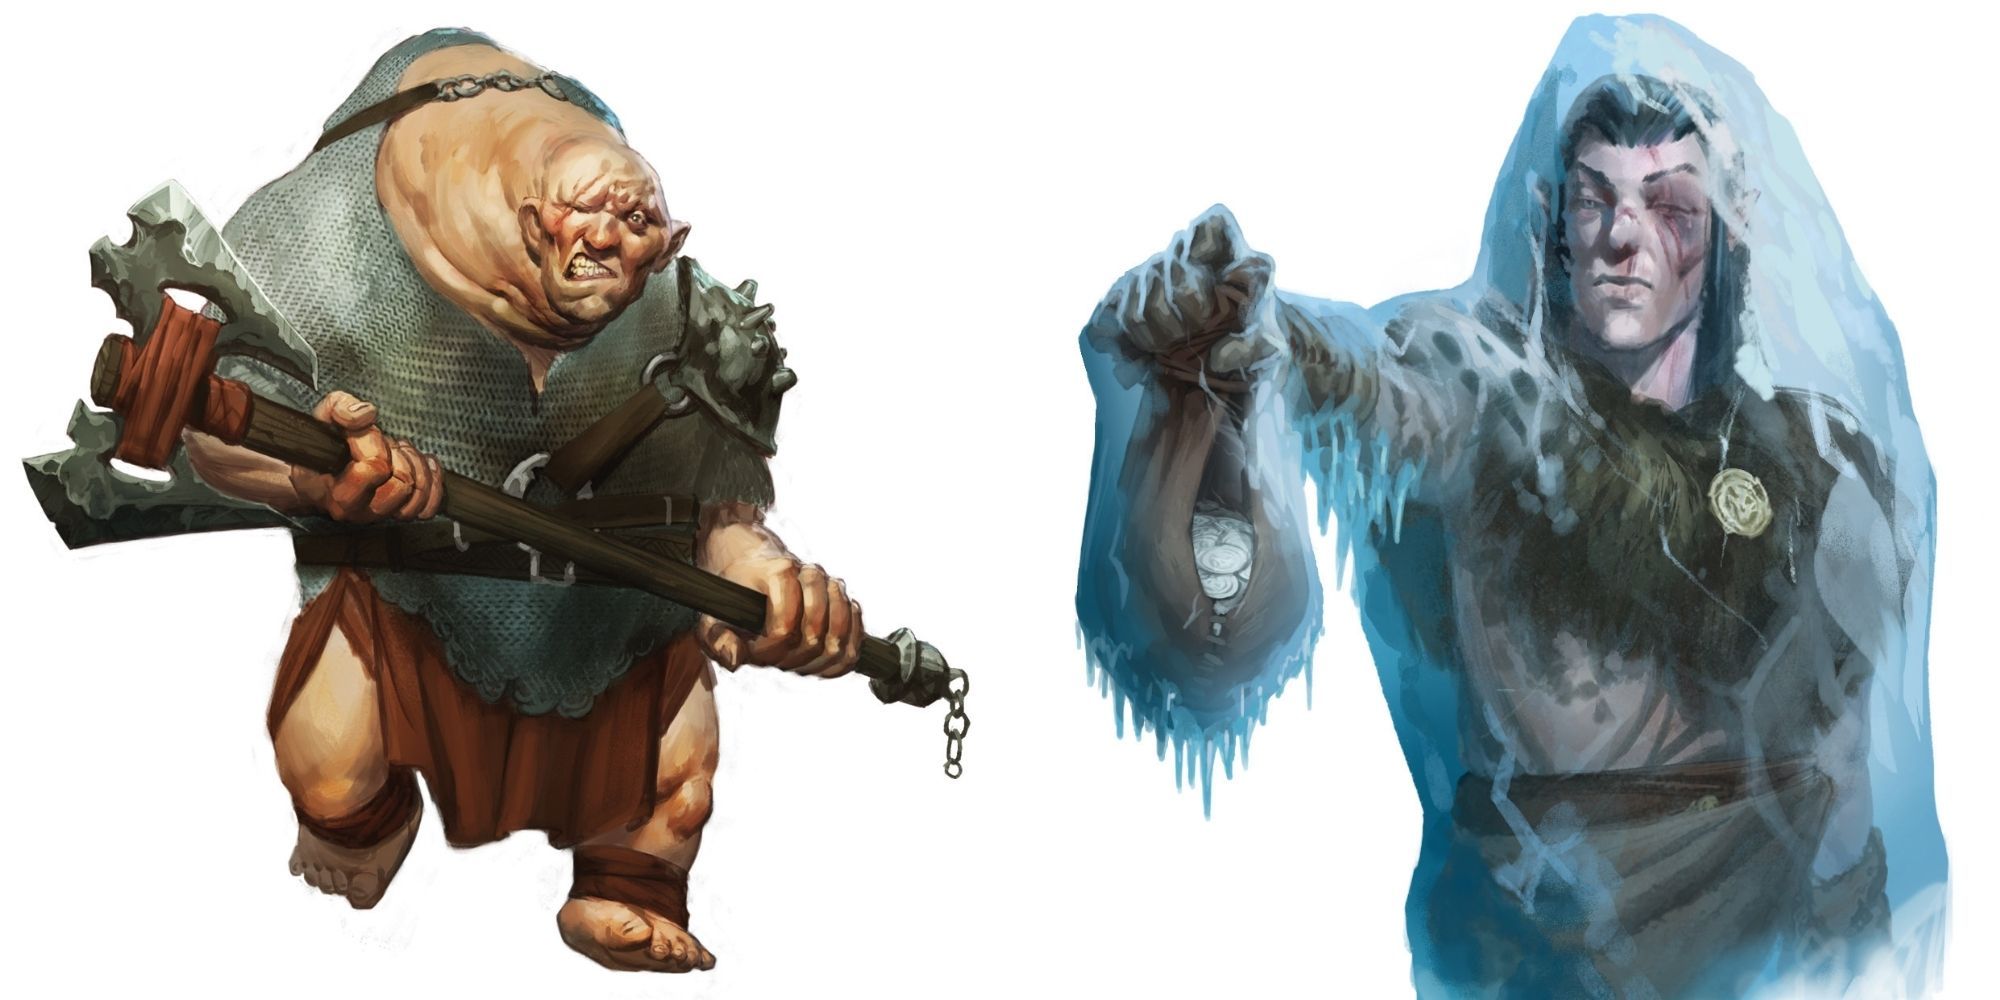 D&D Tales From The Yawning Portal - Against The Giants - The Keeper - A Frozen Half-Elf